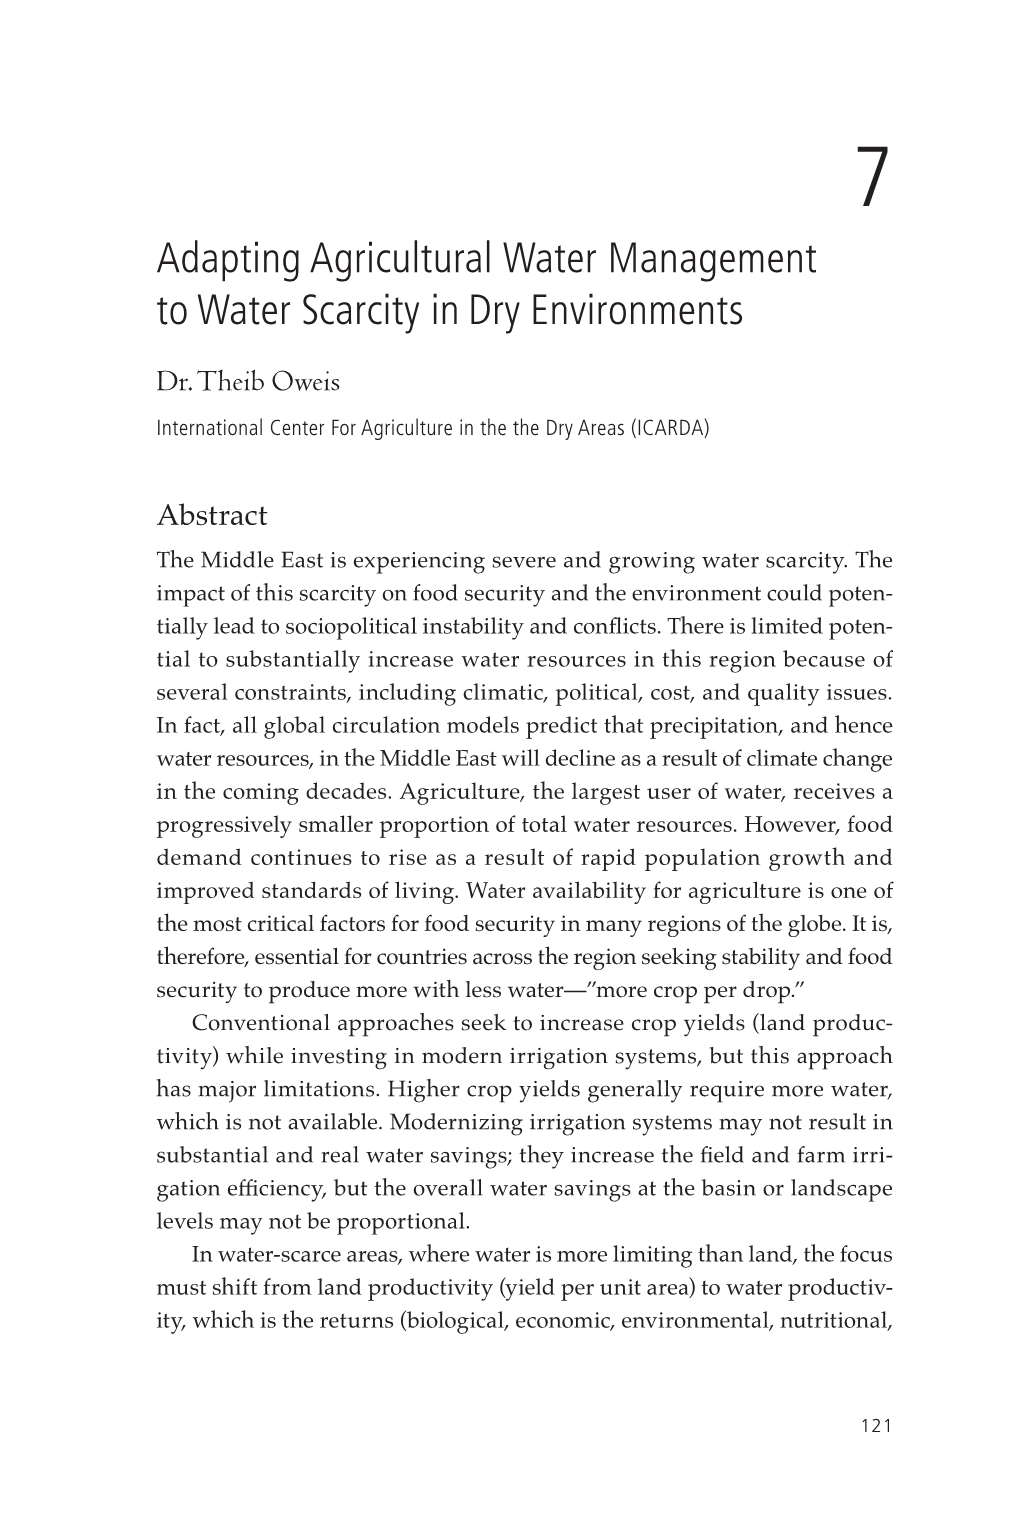 Adapting Agricultural Water Management to Water Scarcity in Dry Environments